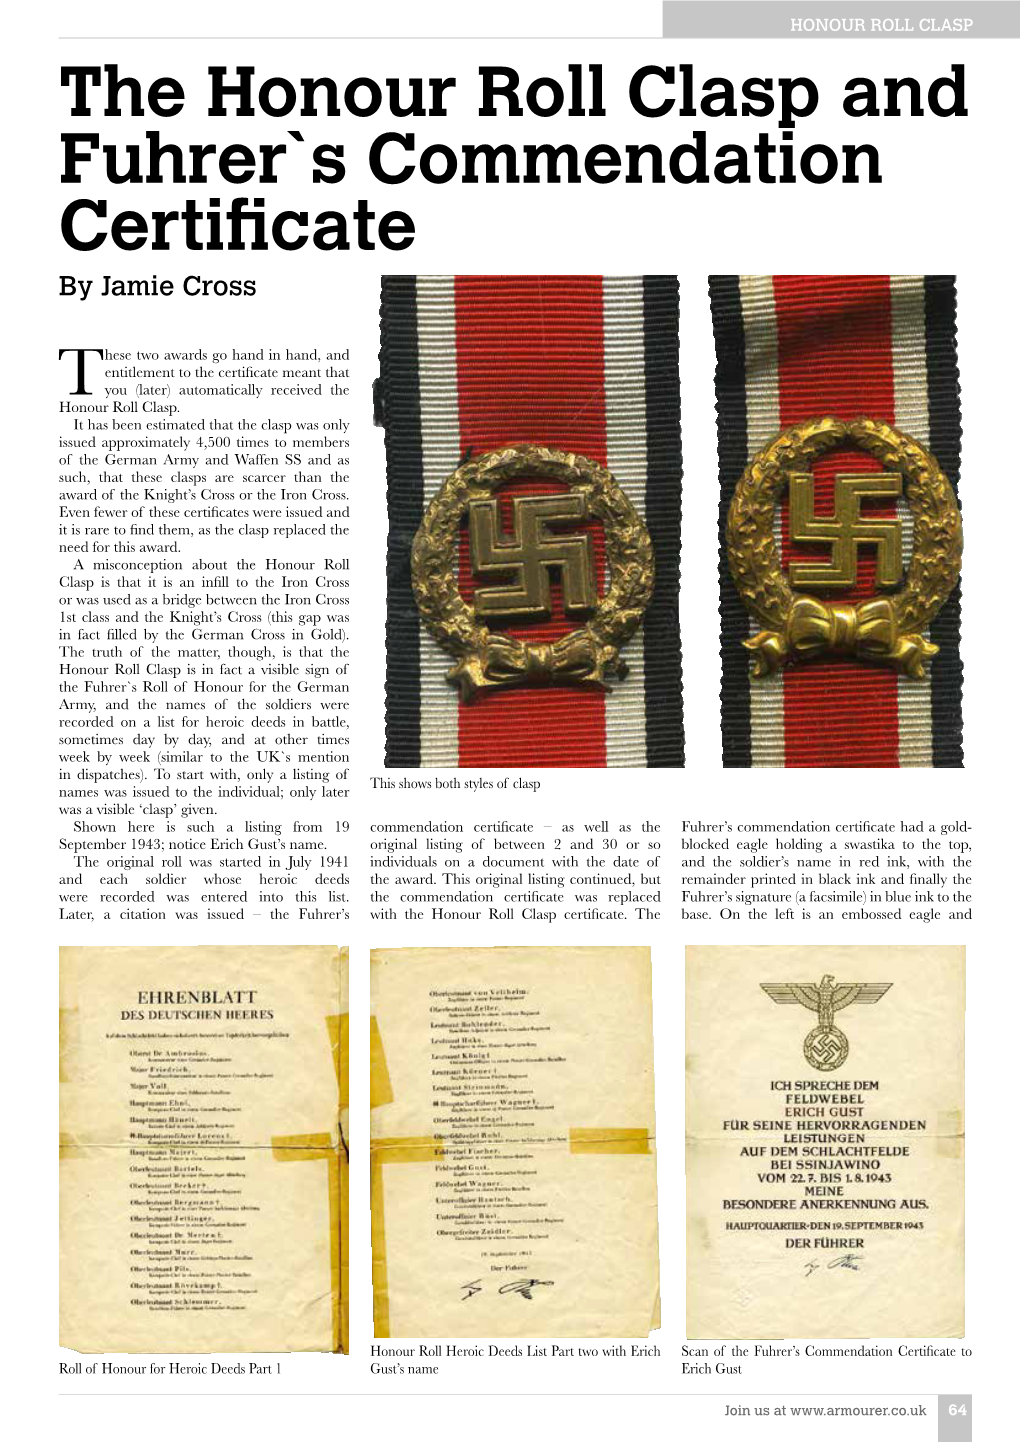 Honour Roll Clasp Article